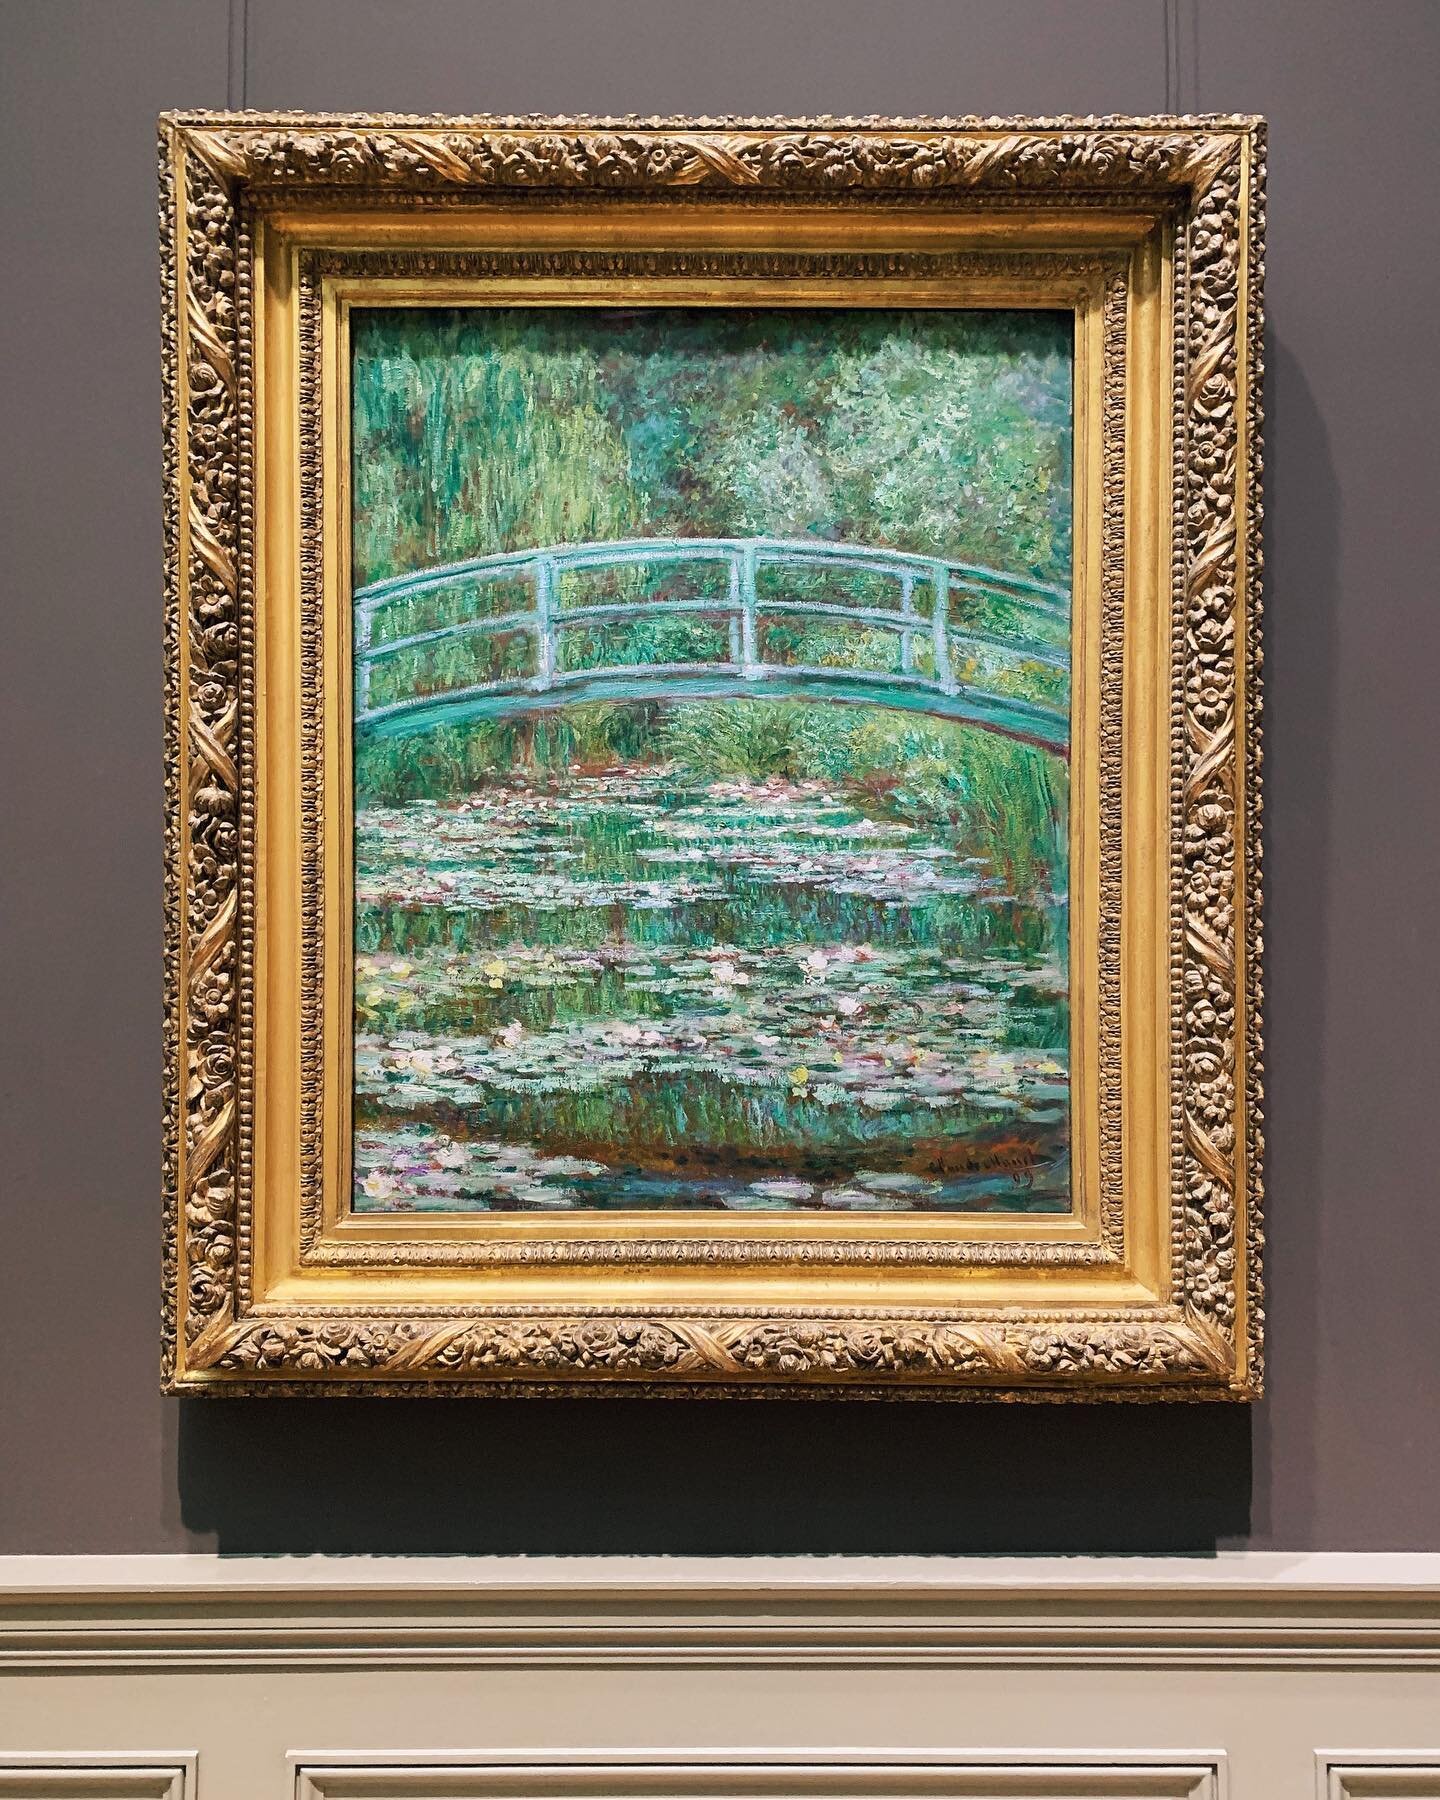 The @metmuseum was a delight! When we were in Paris in 2019 I kept asking Drew &ldquo;where is this painting?&rdquo; And every time, Google told us &ldquo;oh yeah, that painting is in New York&rdquo; 😂 and that was when we realized a trip was necess